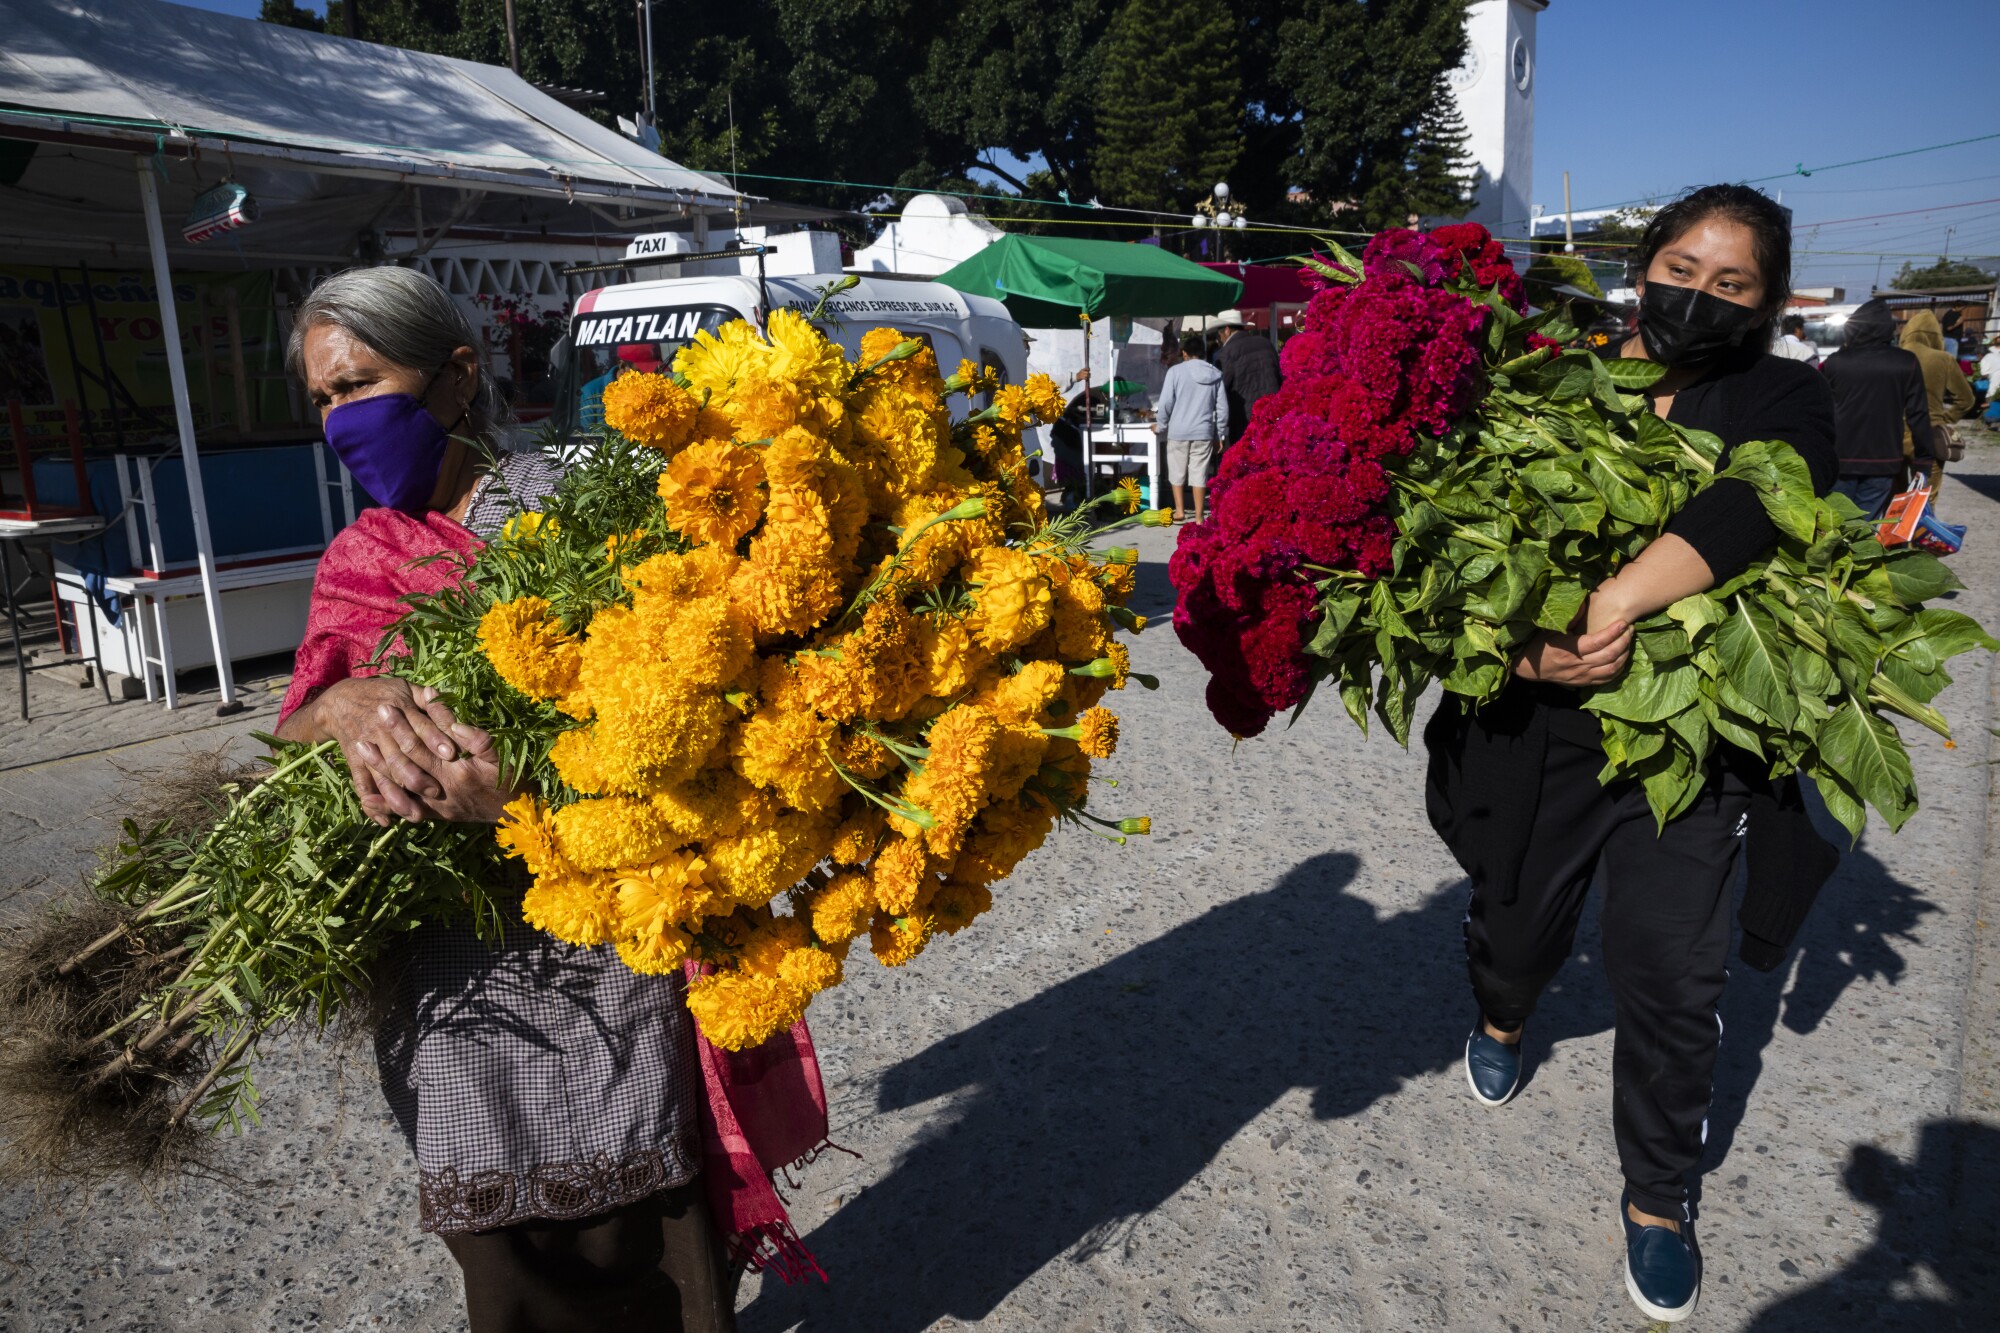  Two women carry large bundles of flowers 